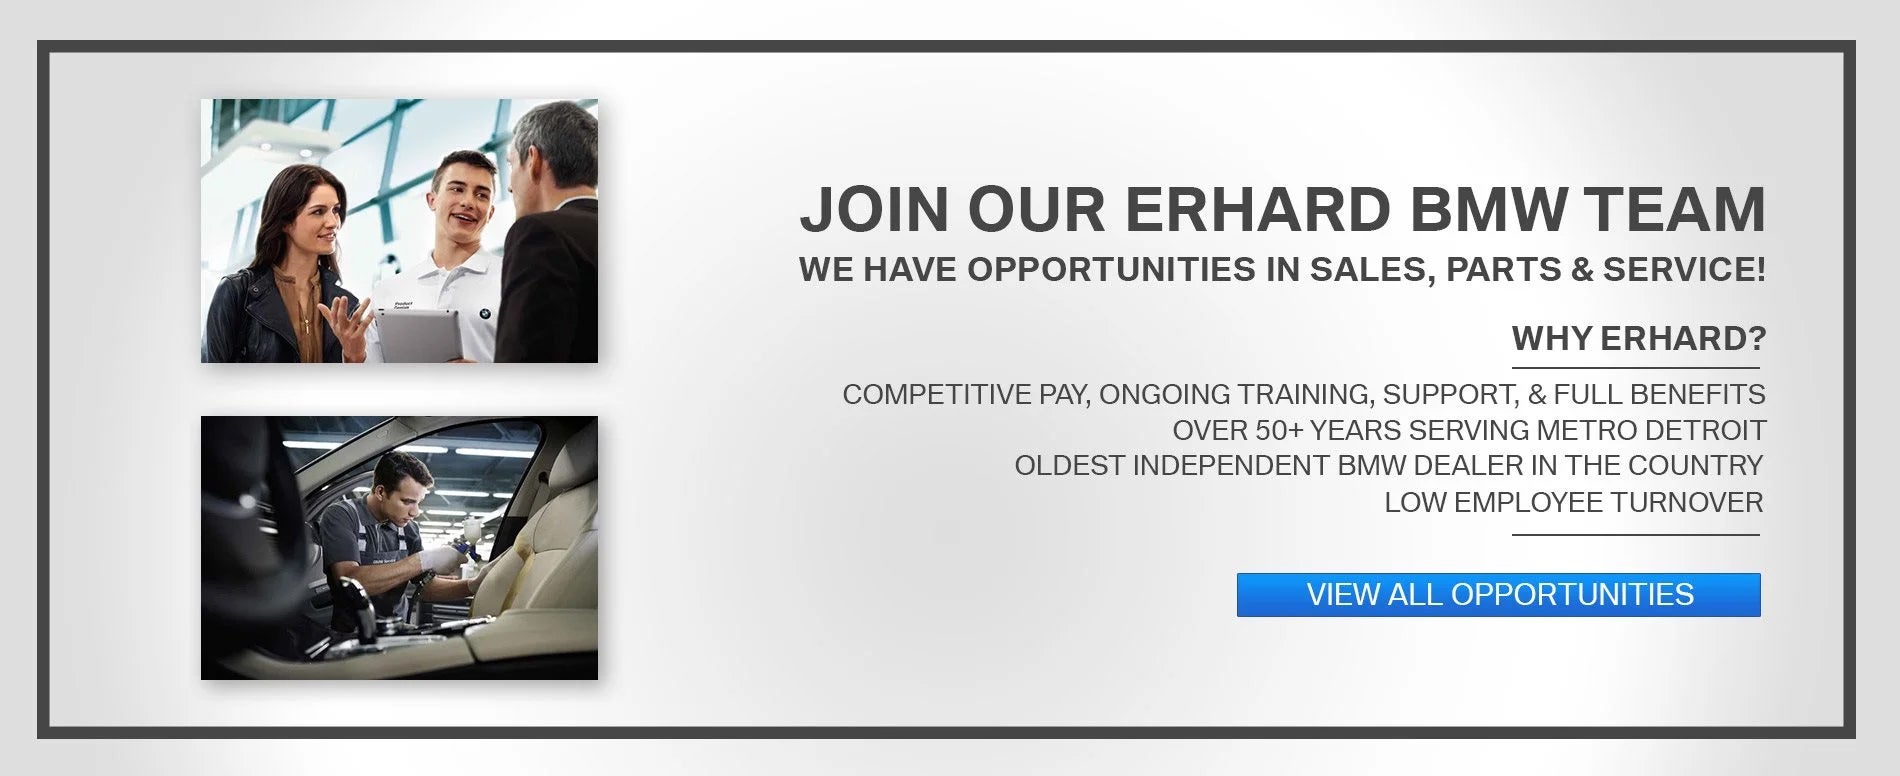 Join Our Erhard BMW Team. BMW dealership and service image.